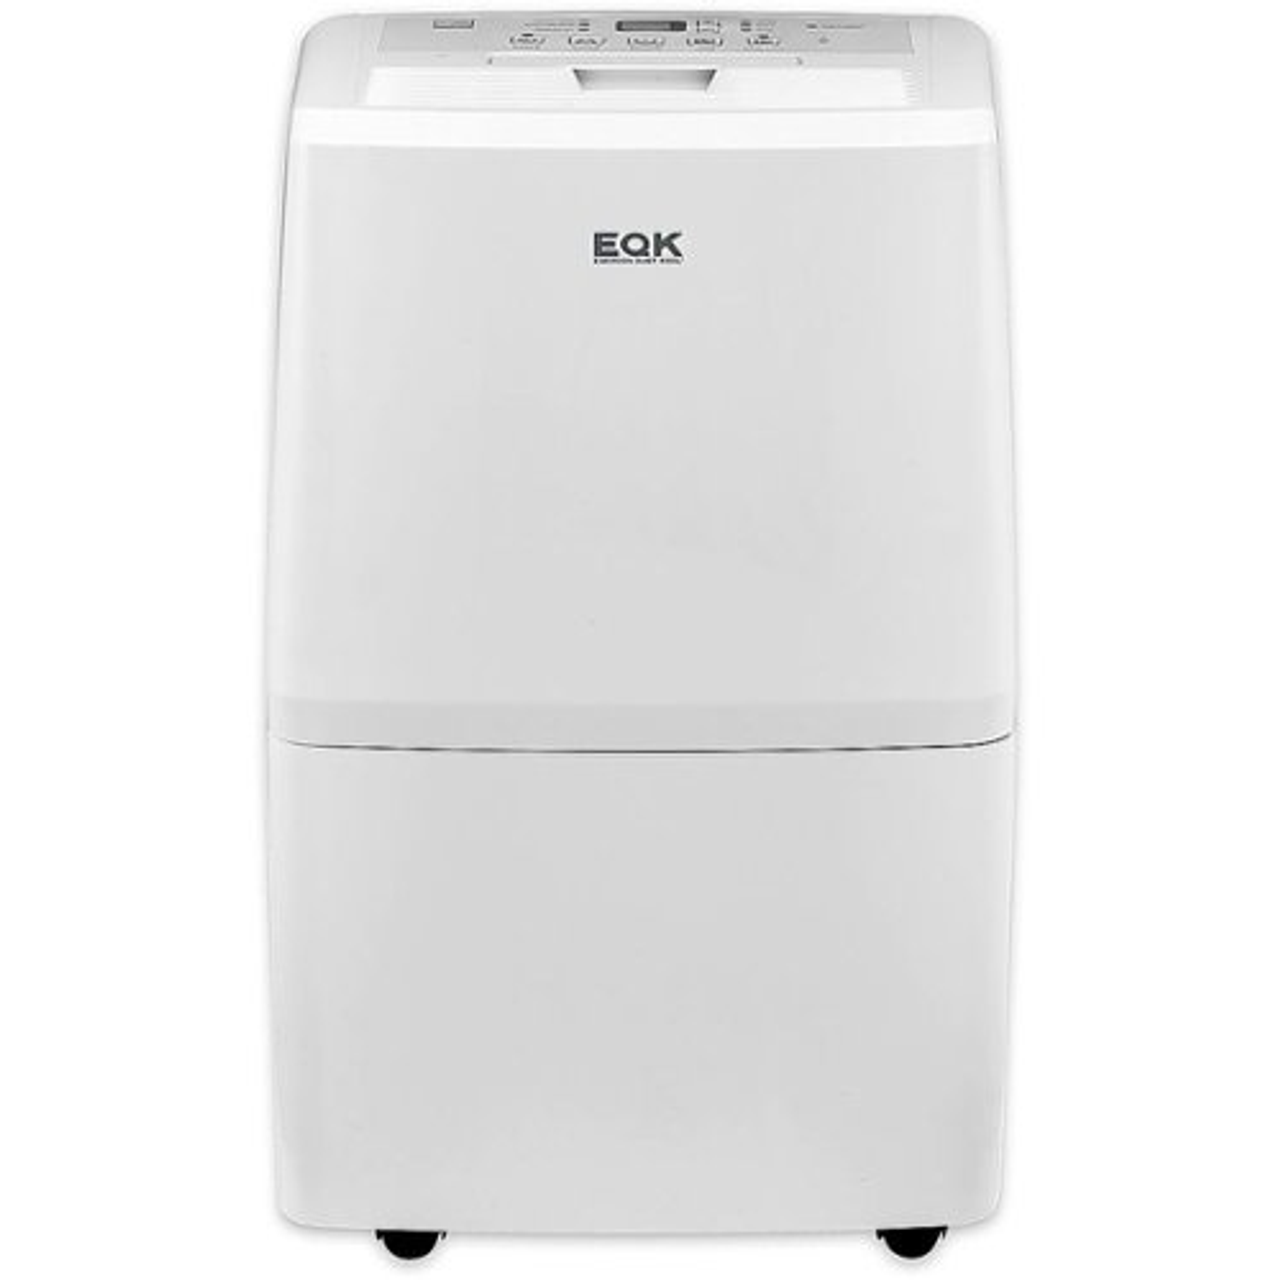 Emerson Quiet Kool - New DOE Standard 50 Pint Dehumidifier (Old DOE 70 Pint), Wifi and Voice Control, Works w Amazon Alexa and Google Home - White